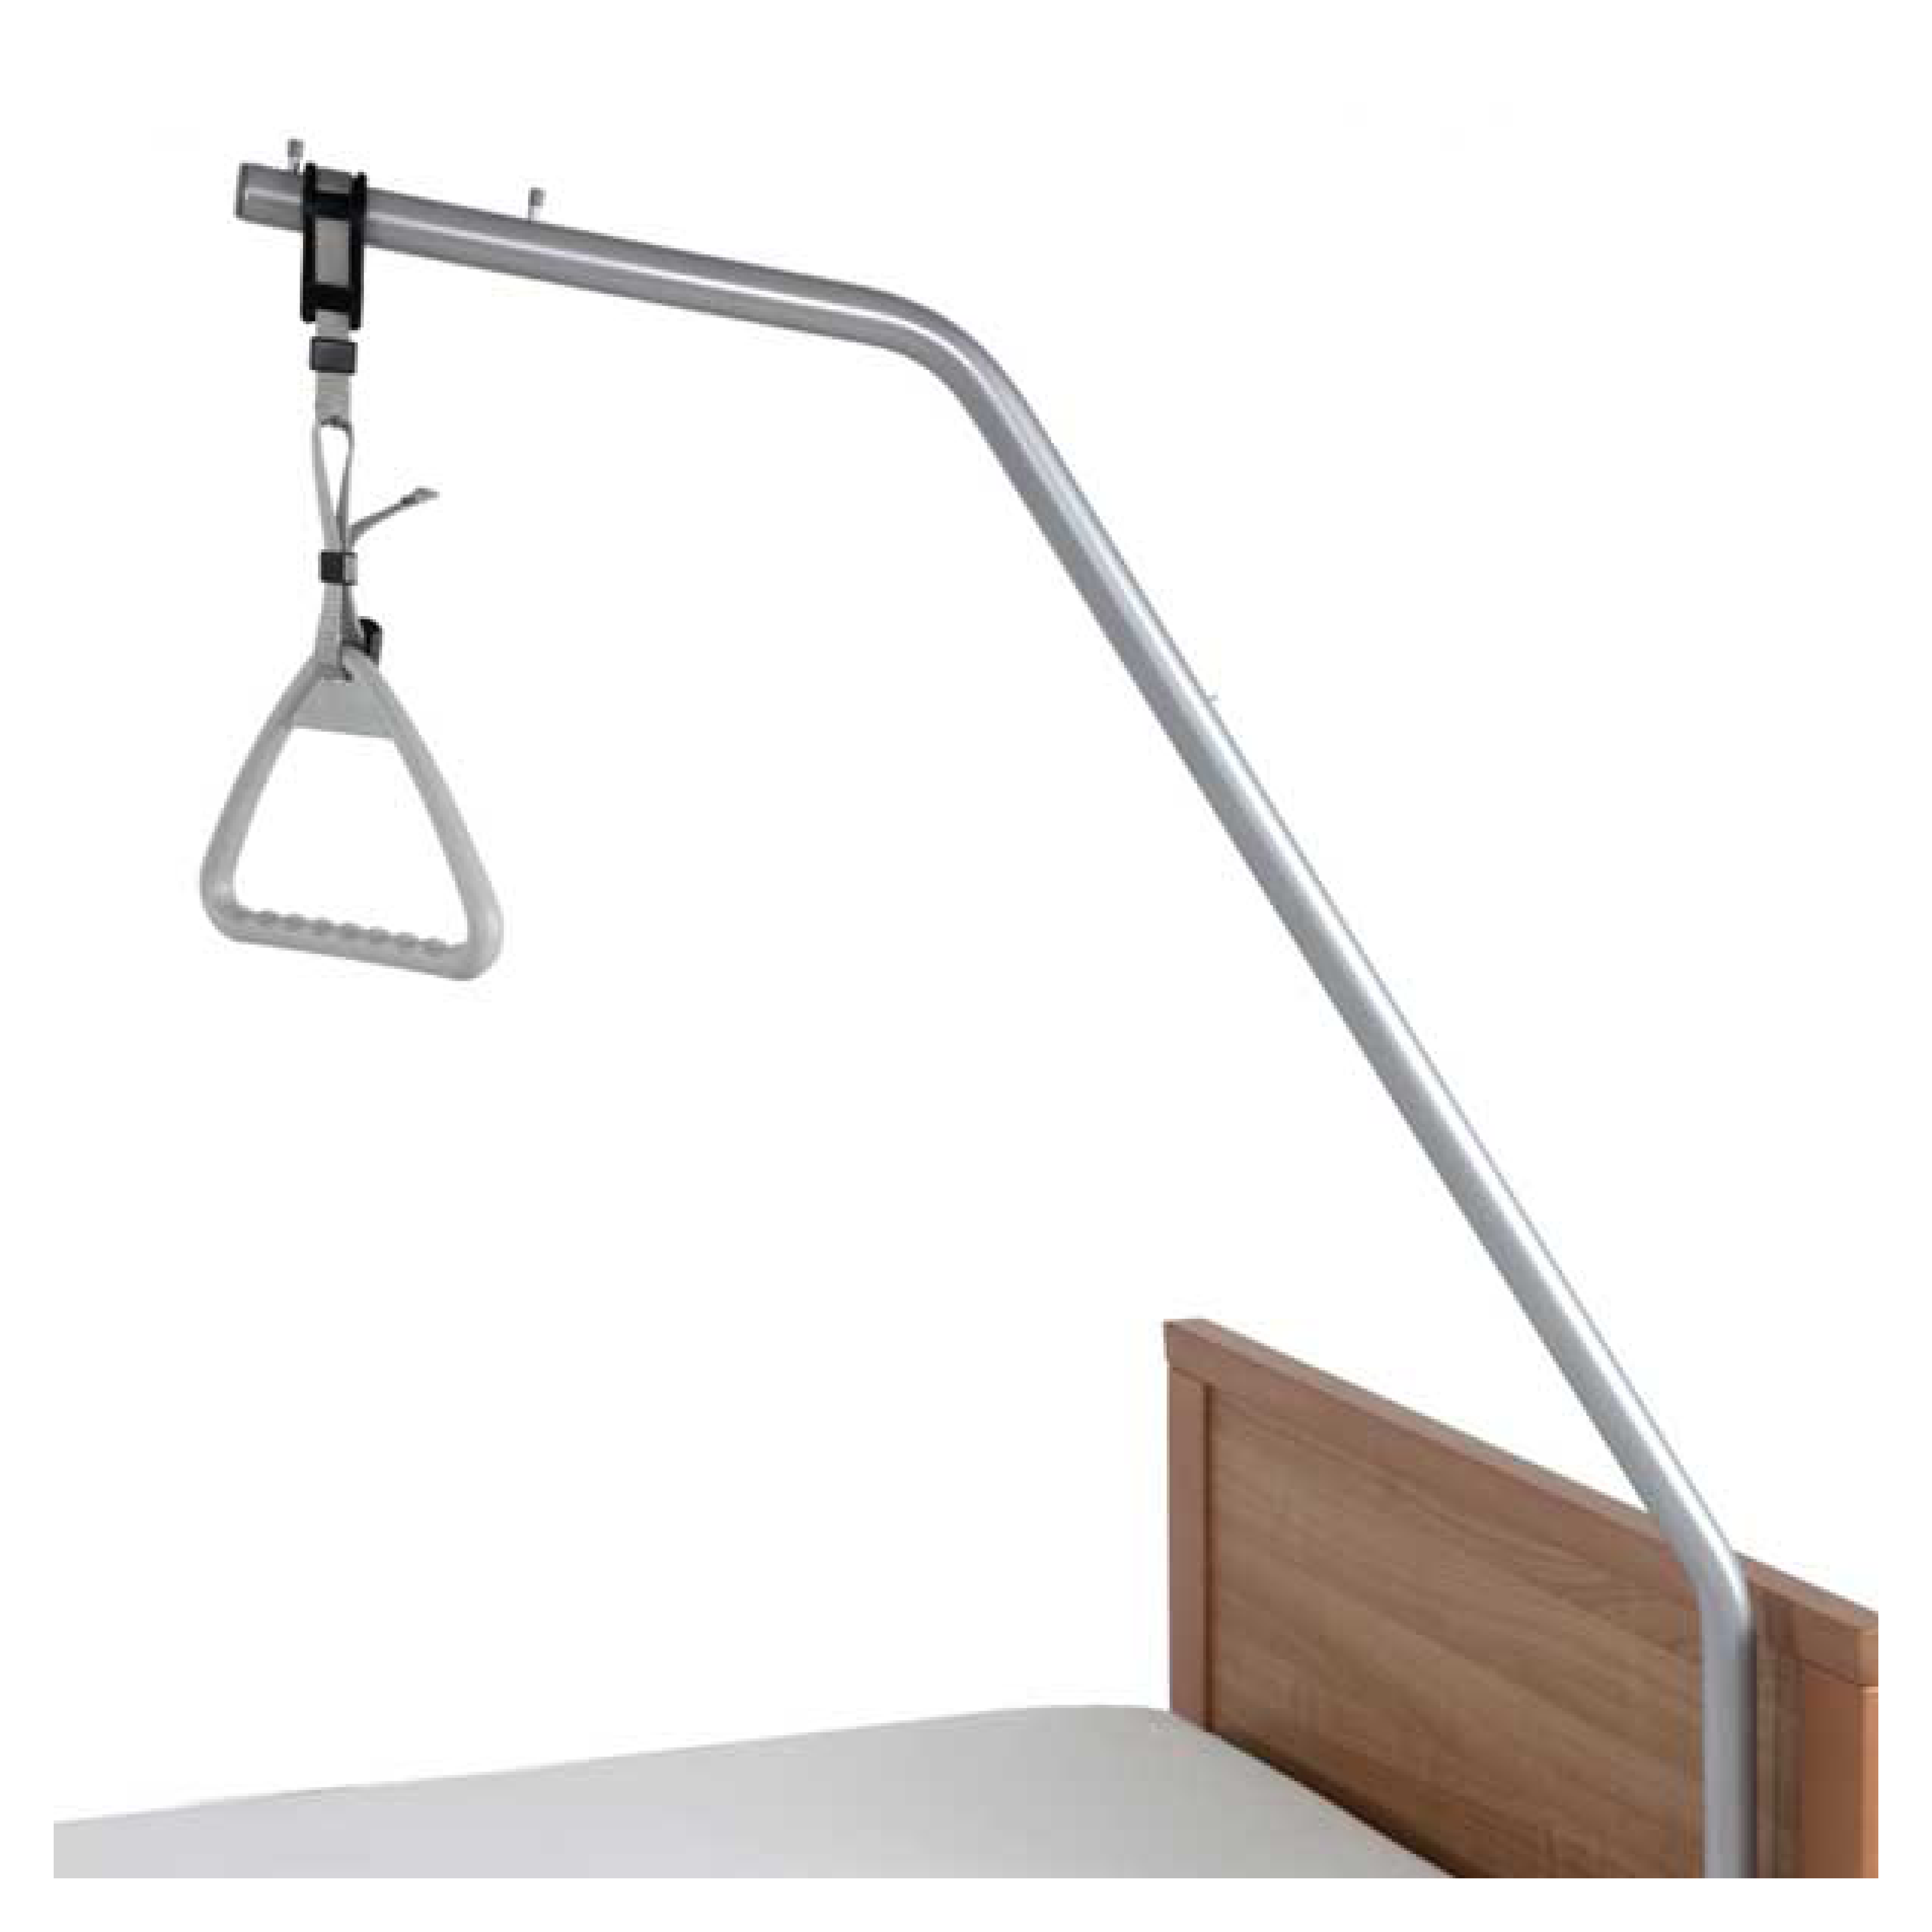 Over-bed hospital table with adjustable triangular grip handle, #15395.